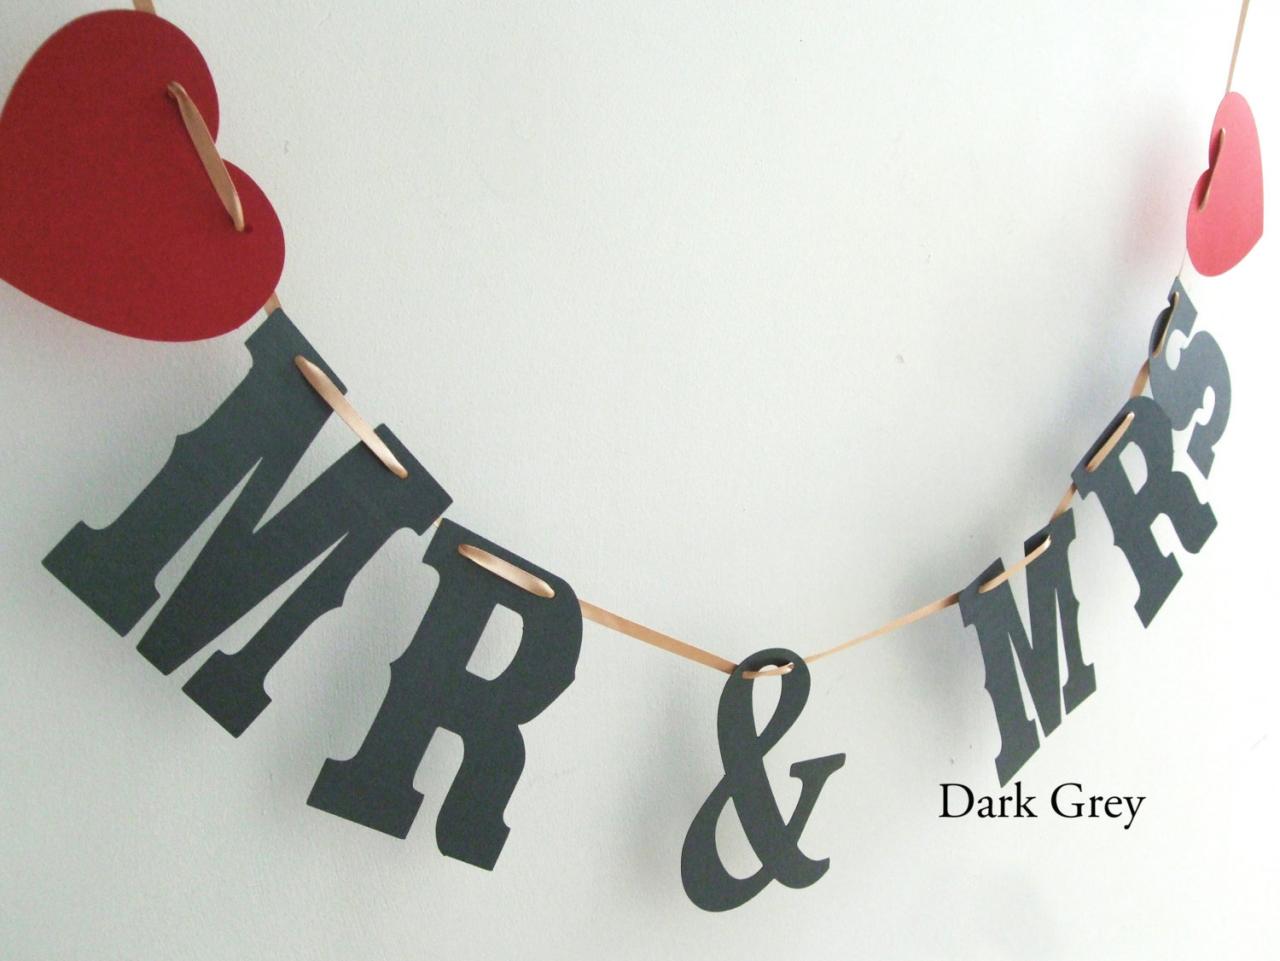 Hearts Mr & Mrs Bunting